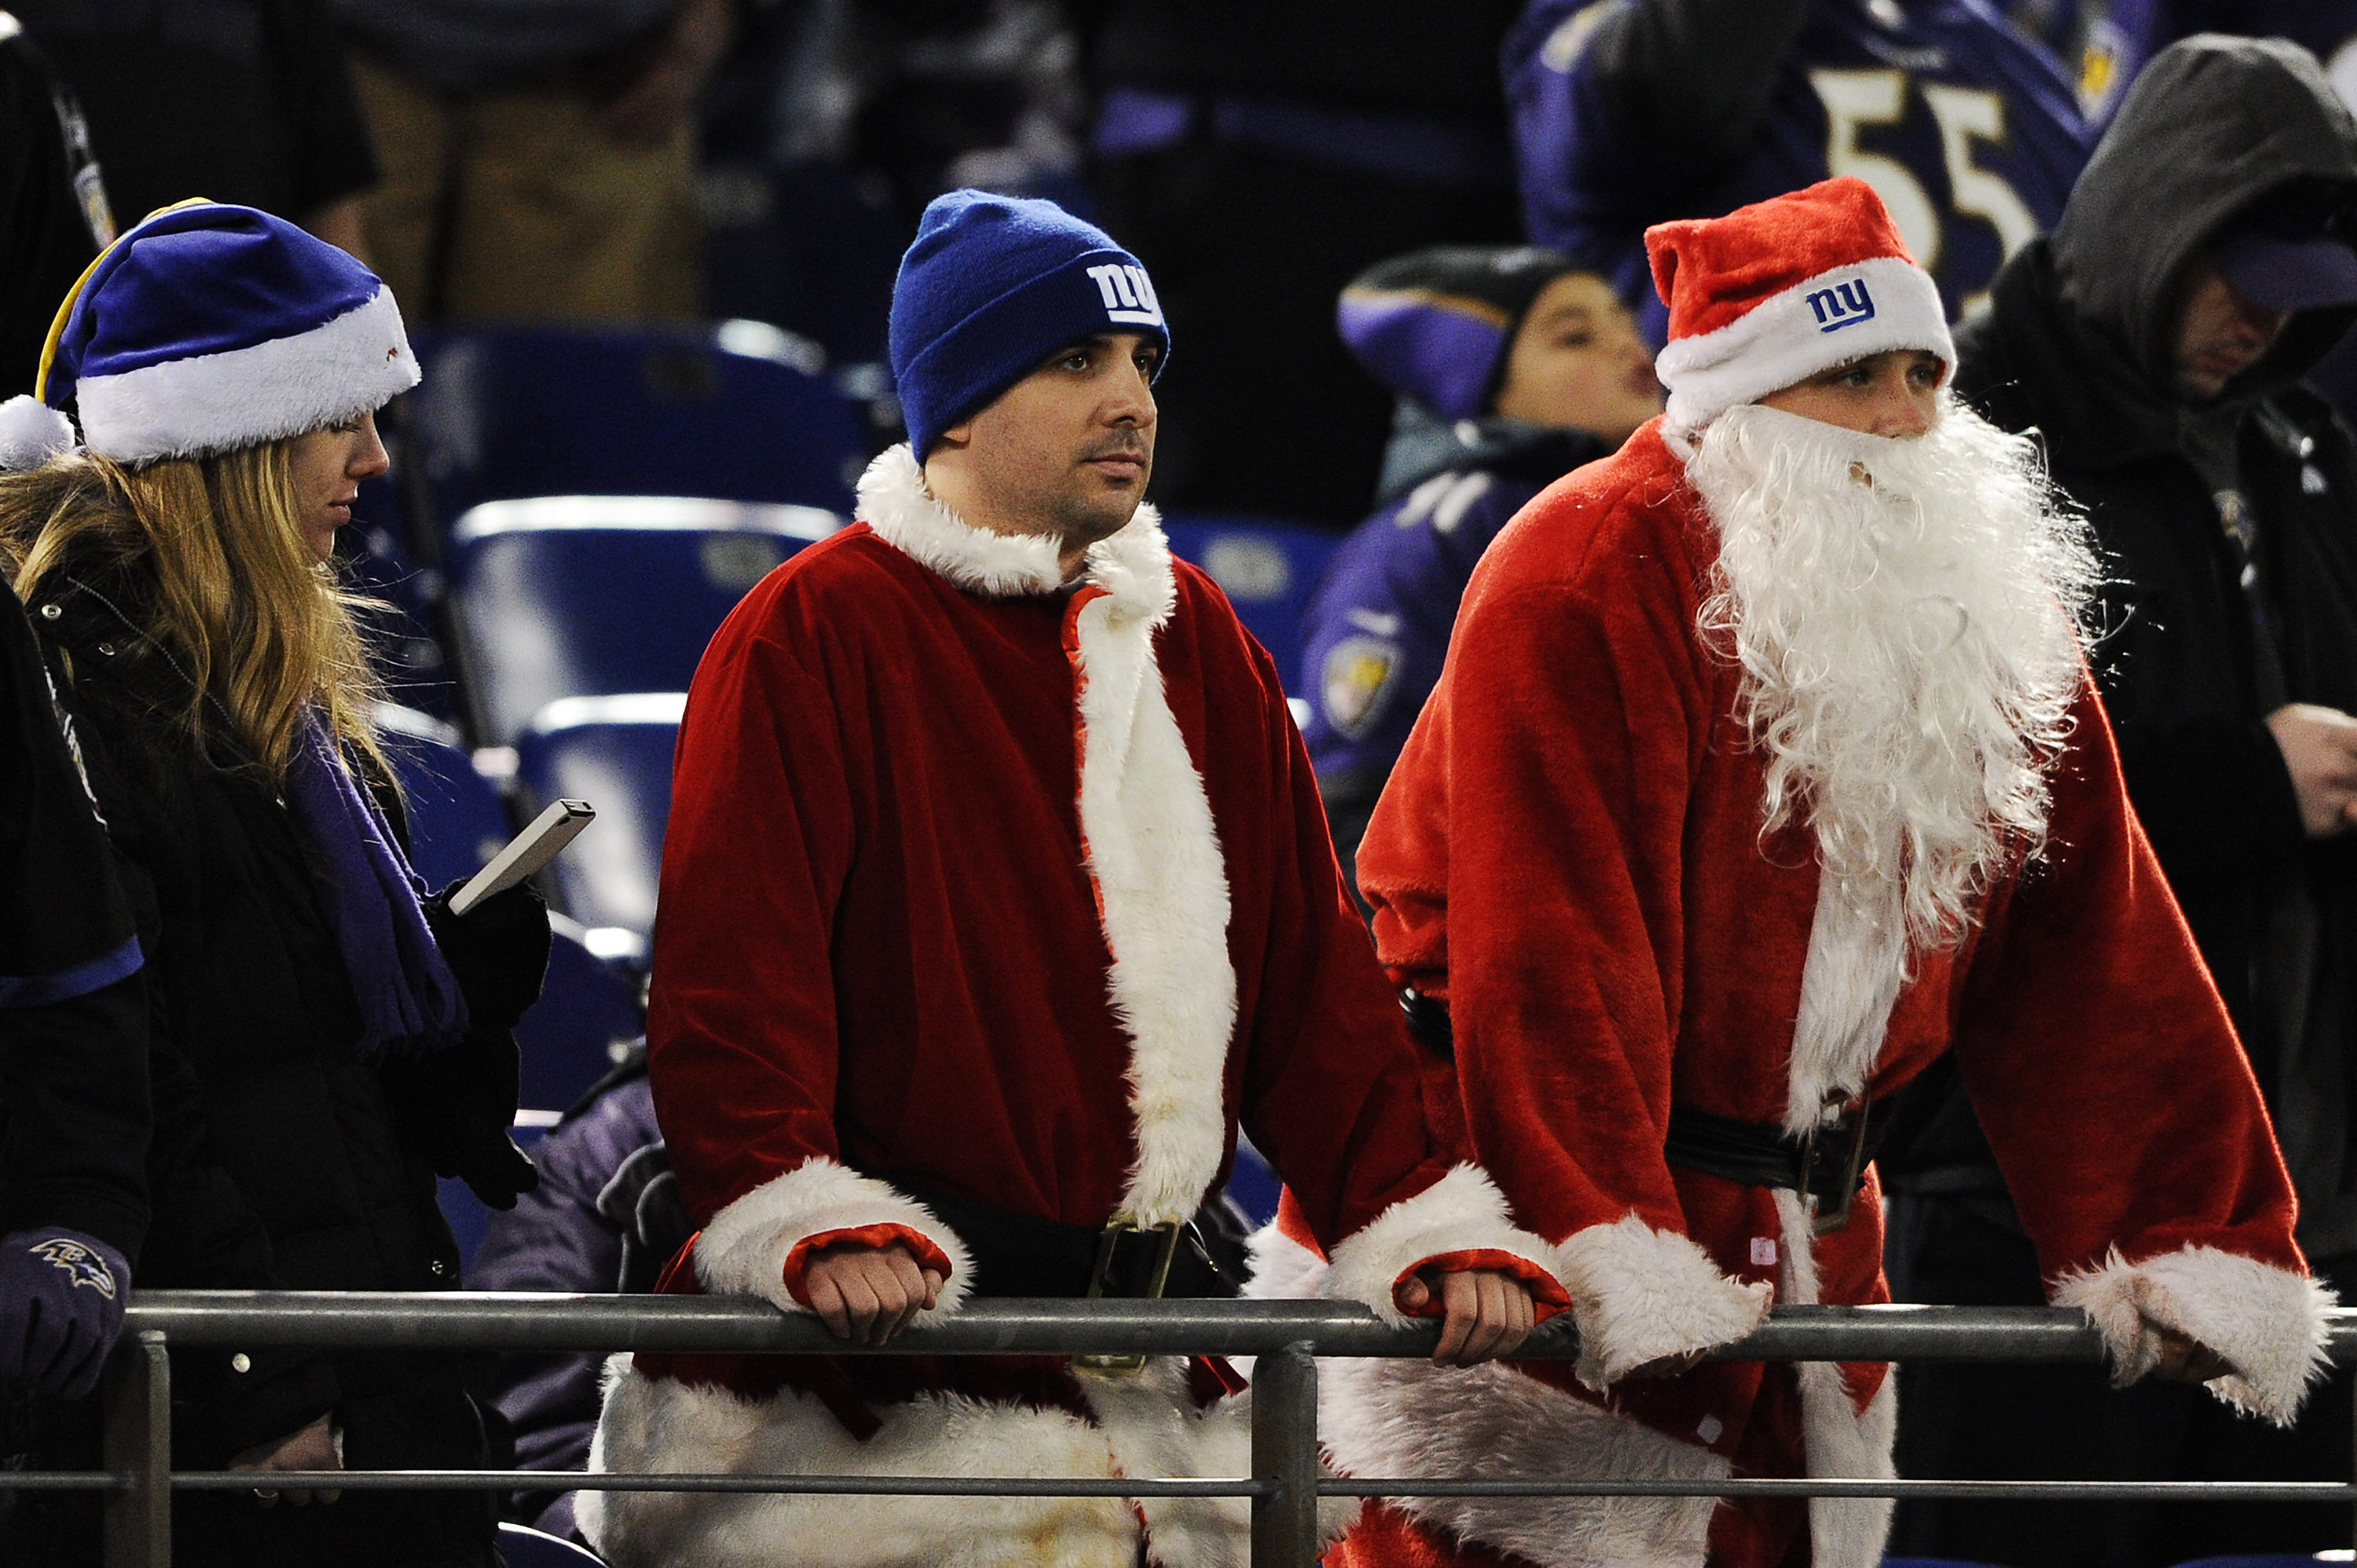 What Football Games Are on TV Today for Christmas?